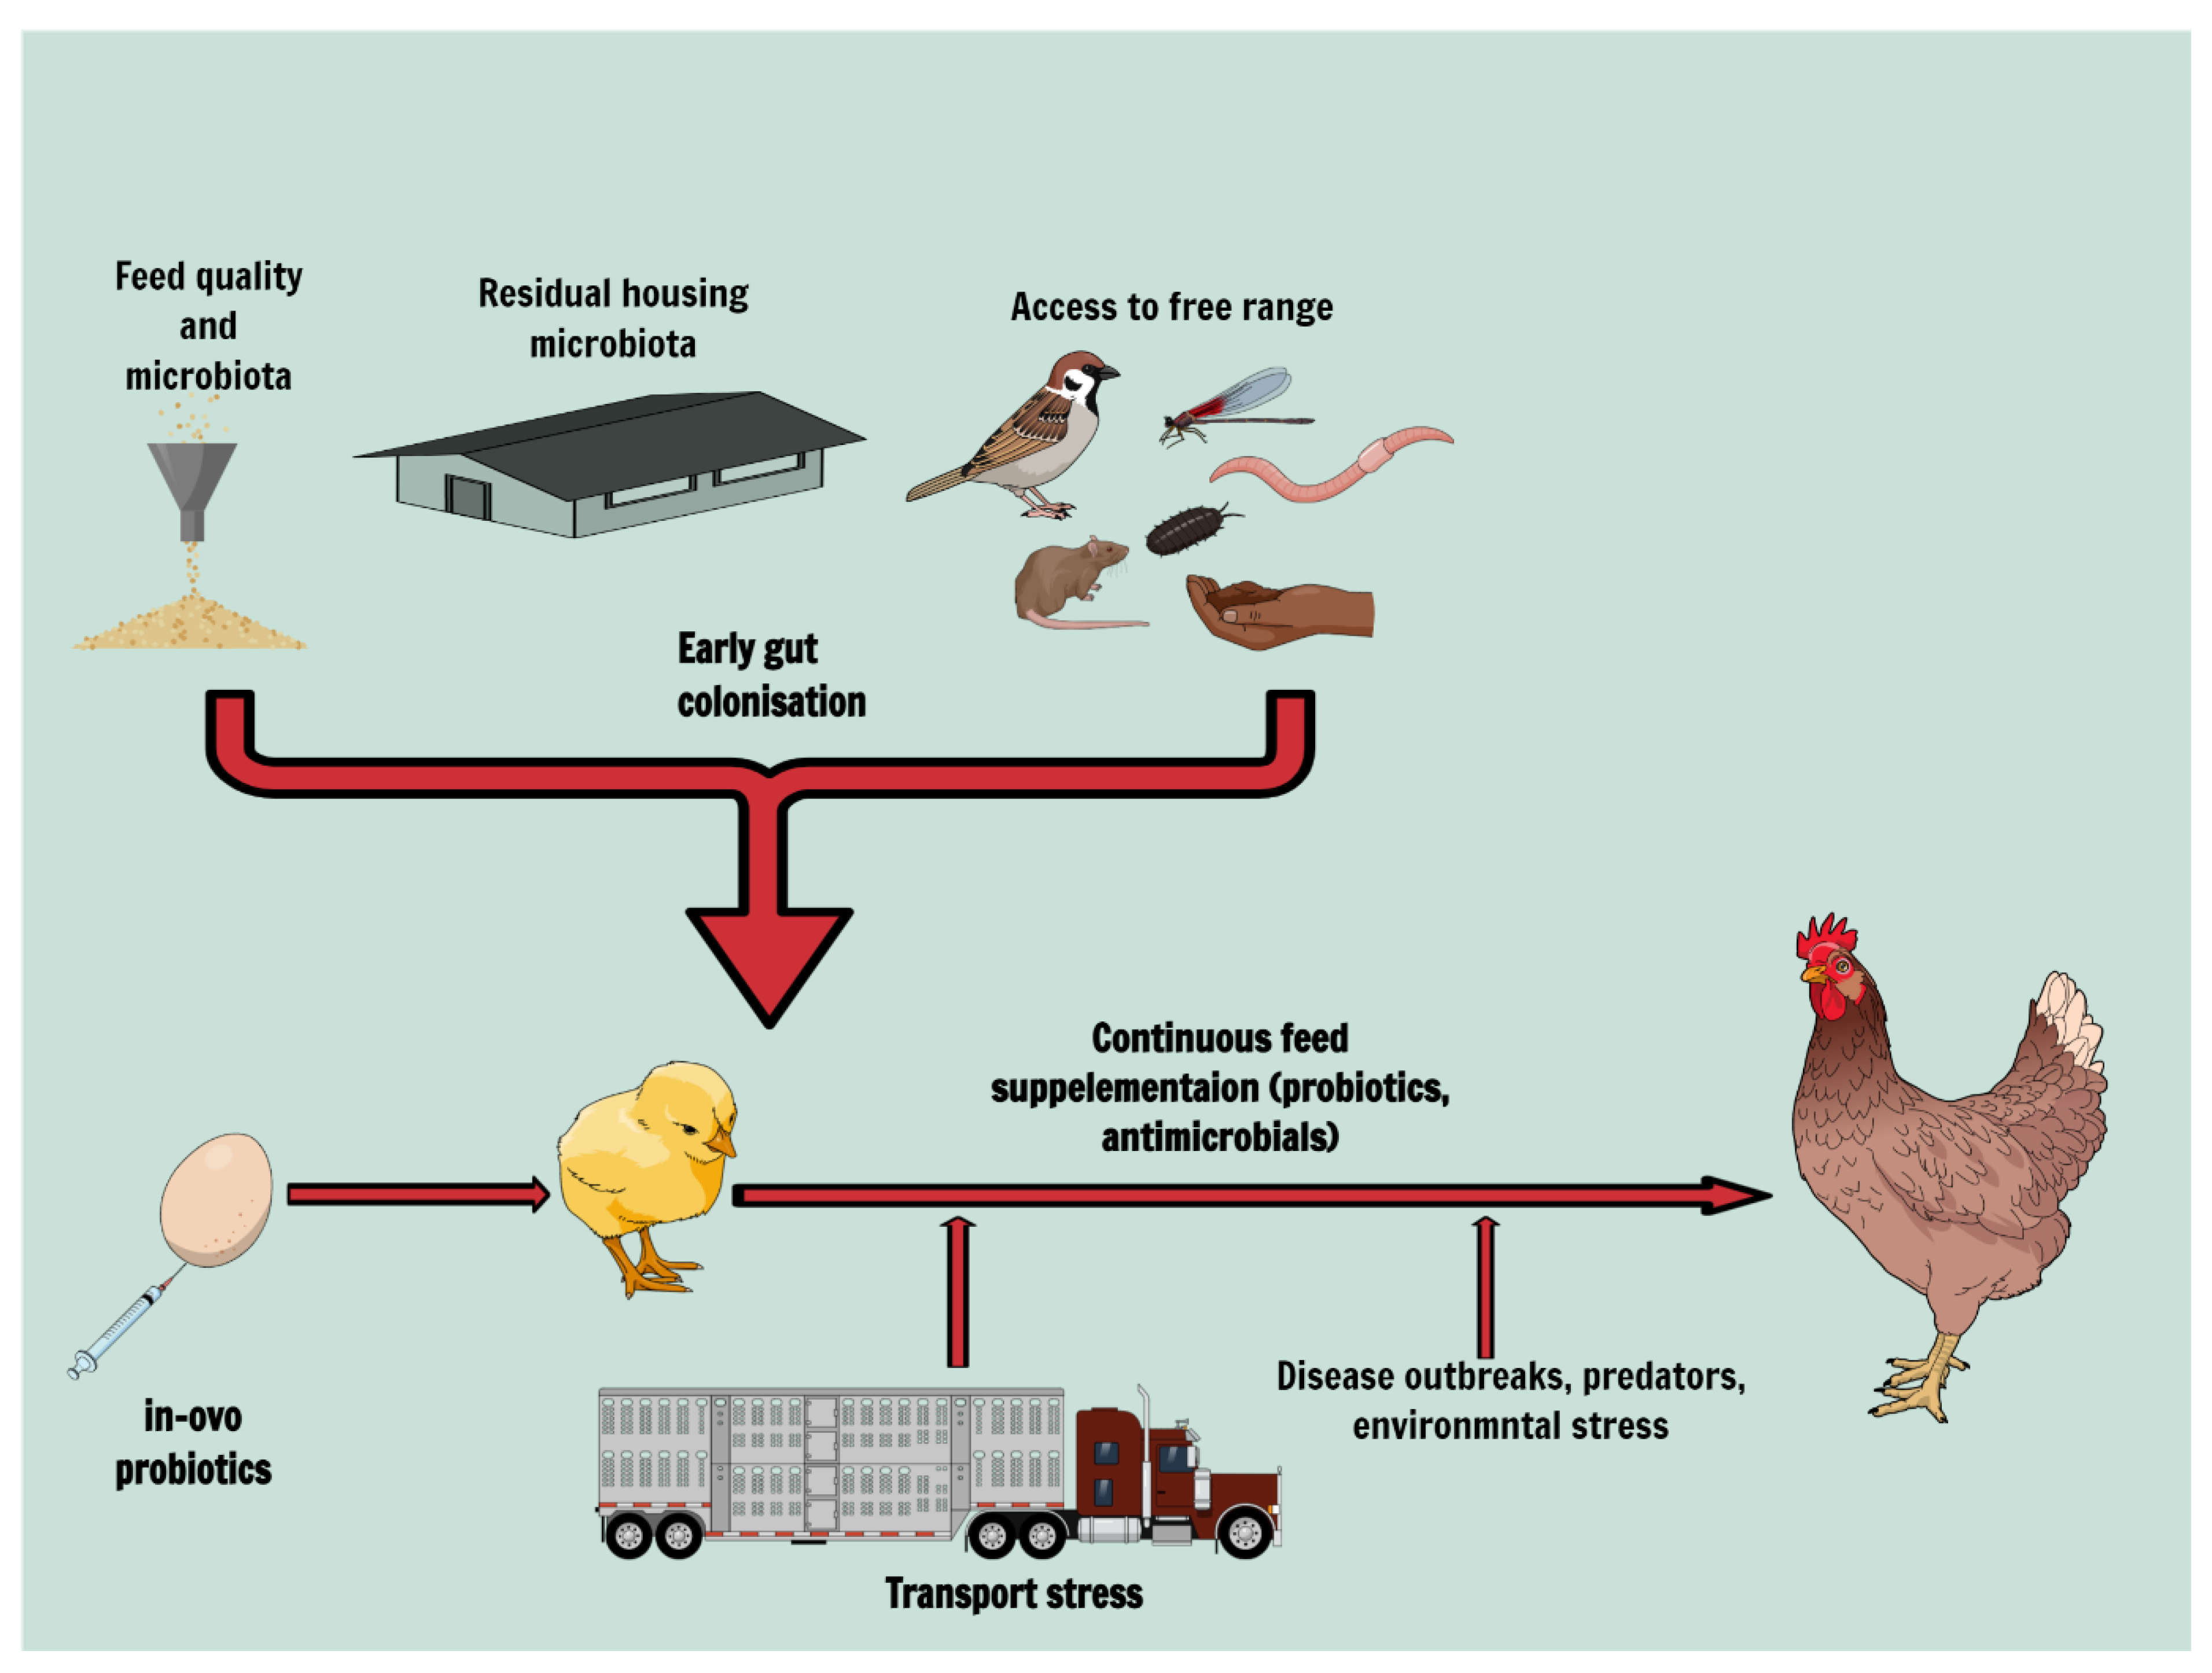 V. The Role of Hens in Controlling Weeds and Pests Naturally